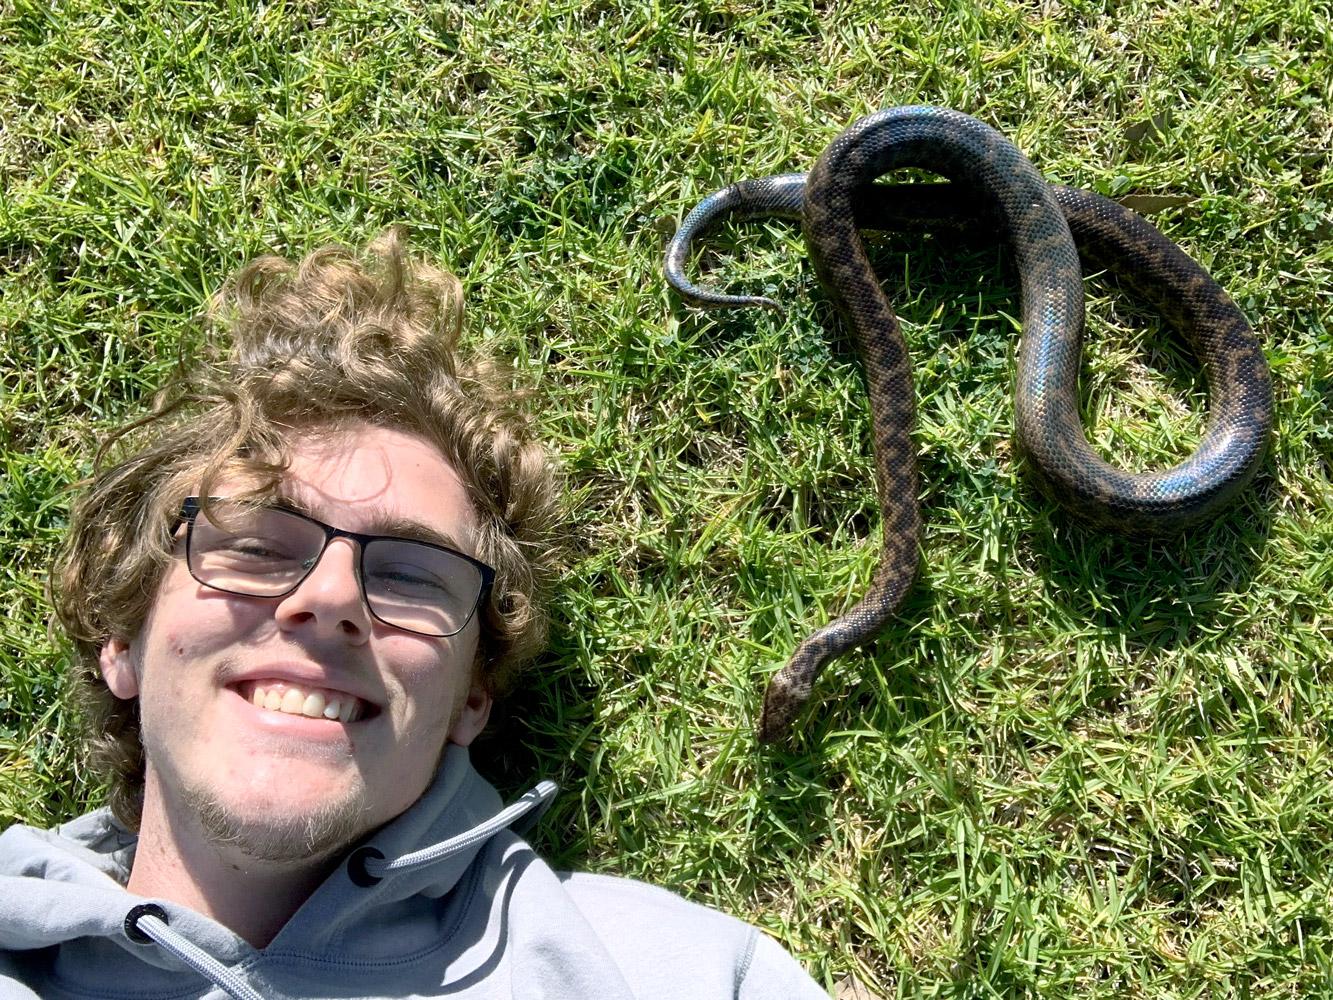 University of Adelaide animal behaviour student Harry Kent with Lizzie the pet spotted python (Antaresia maculosa). Image by Kenty's Wildlife.